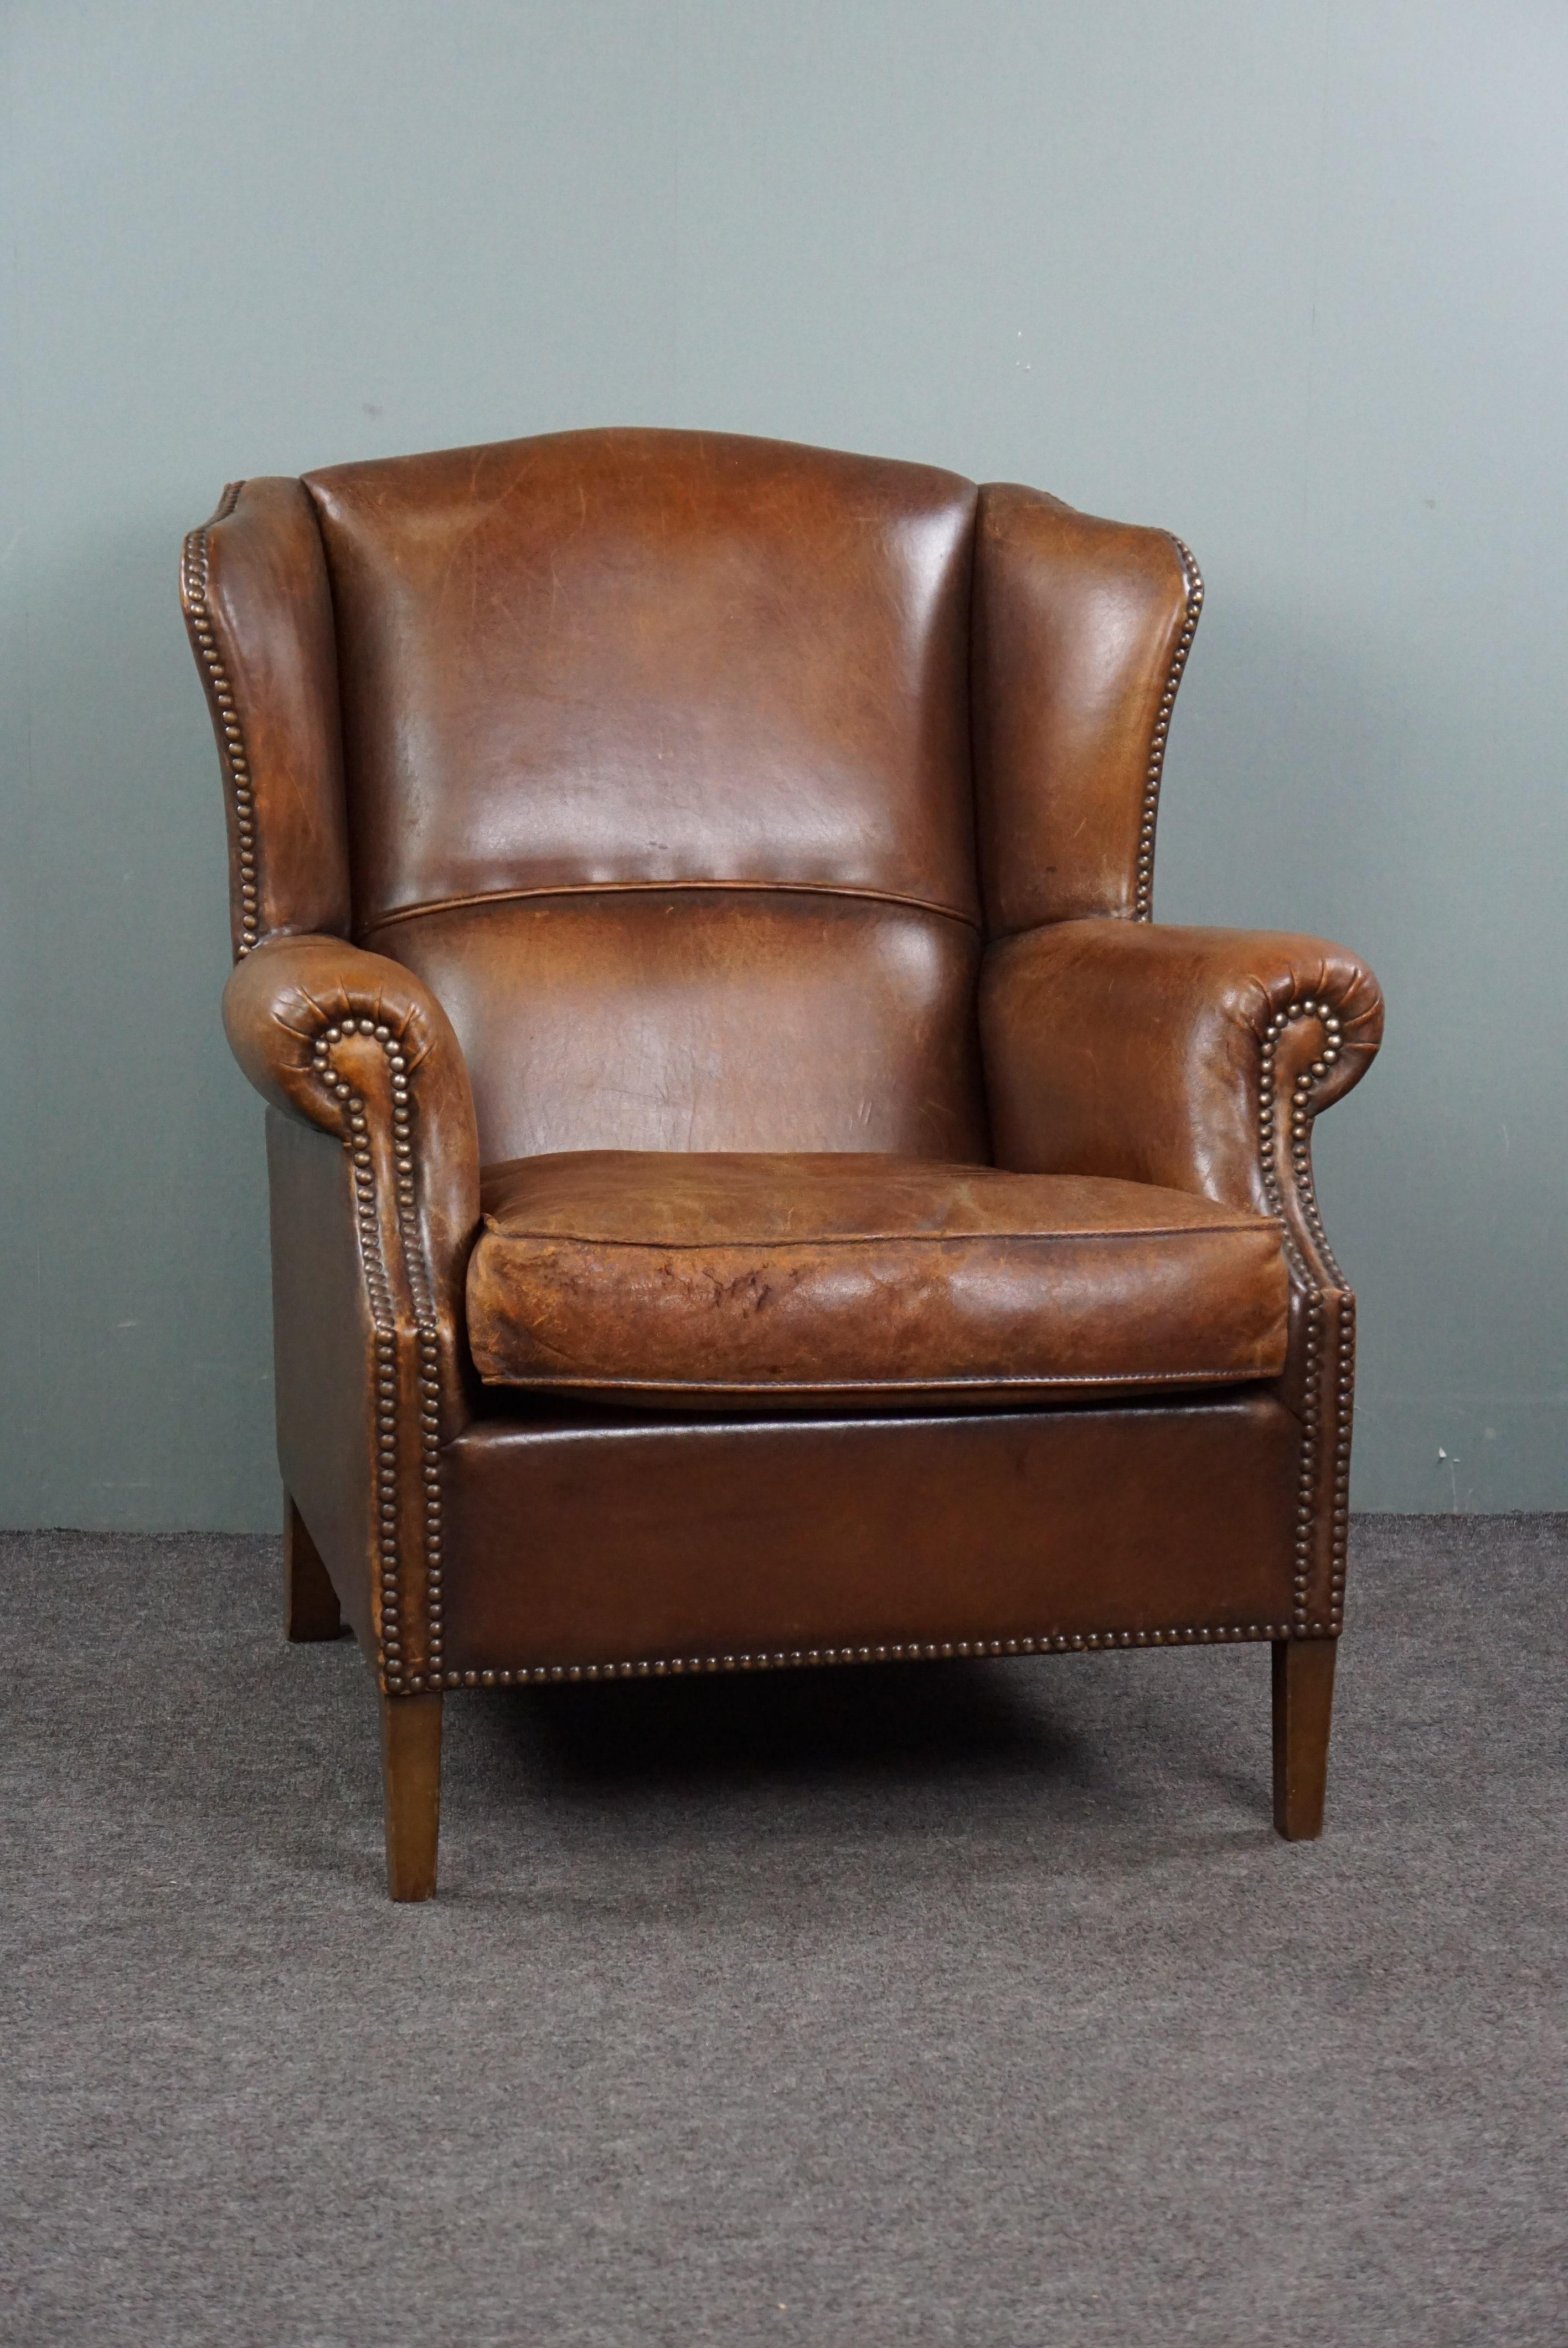 Presented by ByThijs, this beautiful, warmly colored sheep leather wing chair adorned with elegant decorative nails.

This chair boasts a striking color and a beautiful patina. The subtle design and decorative nails make this item a chair that